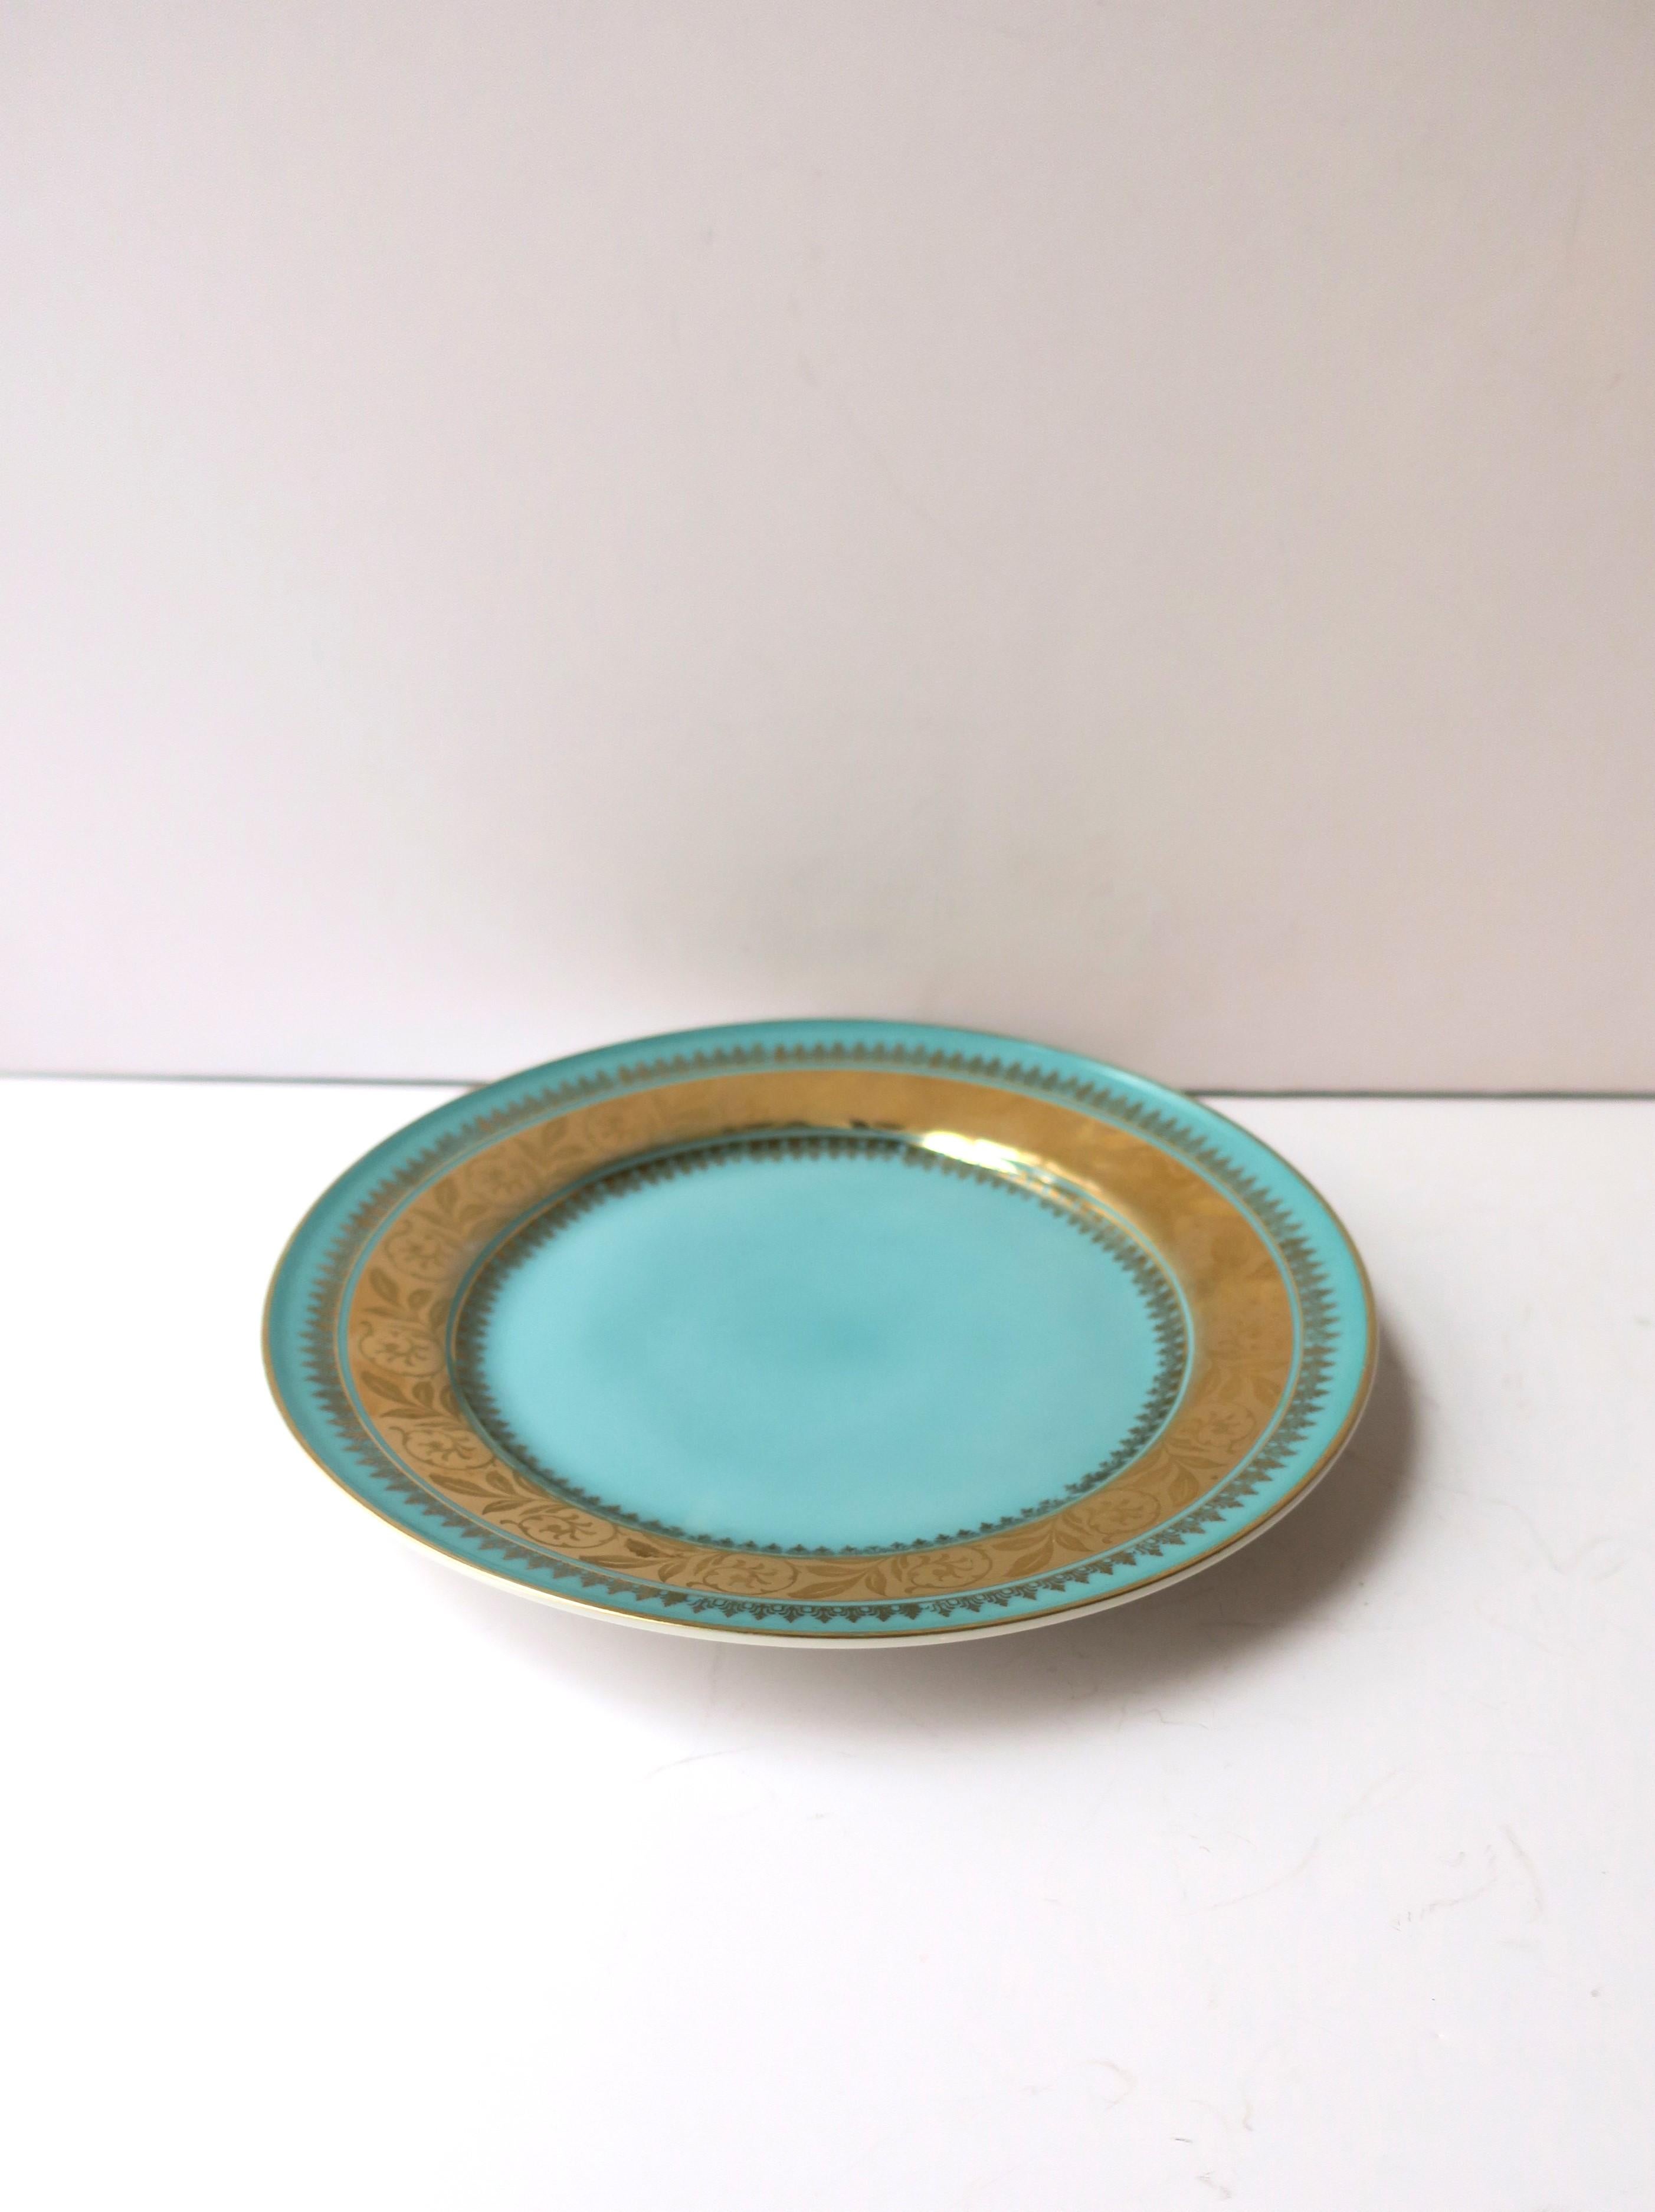 Glazed German Turquoise Blue and Gold Porcelain Plate